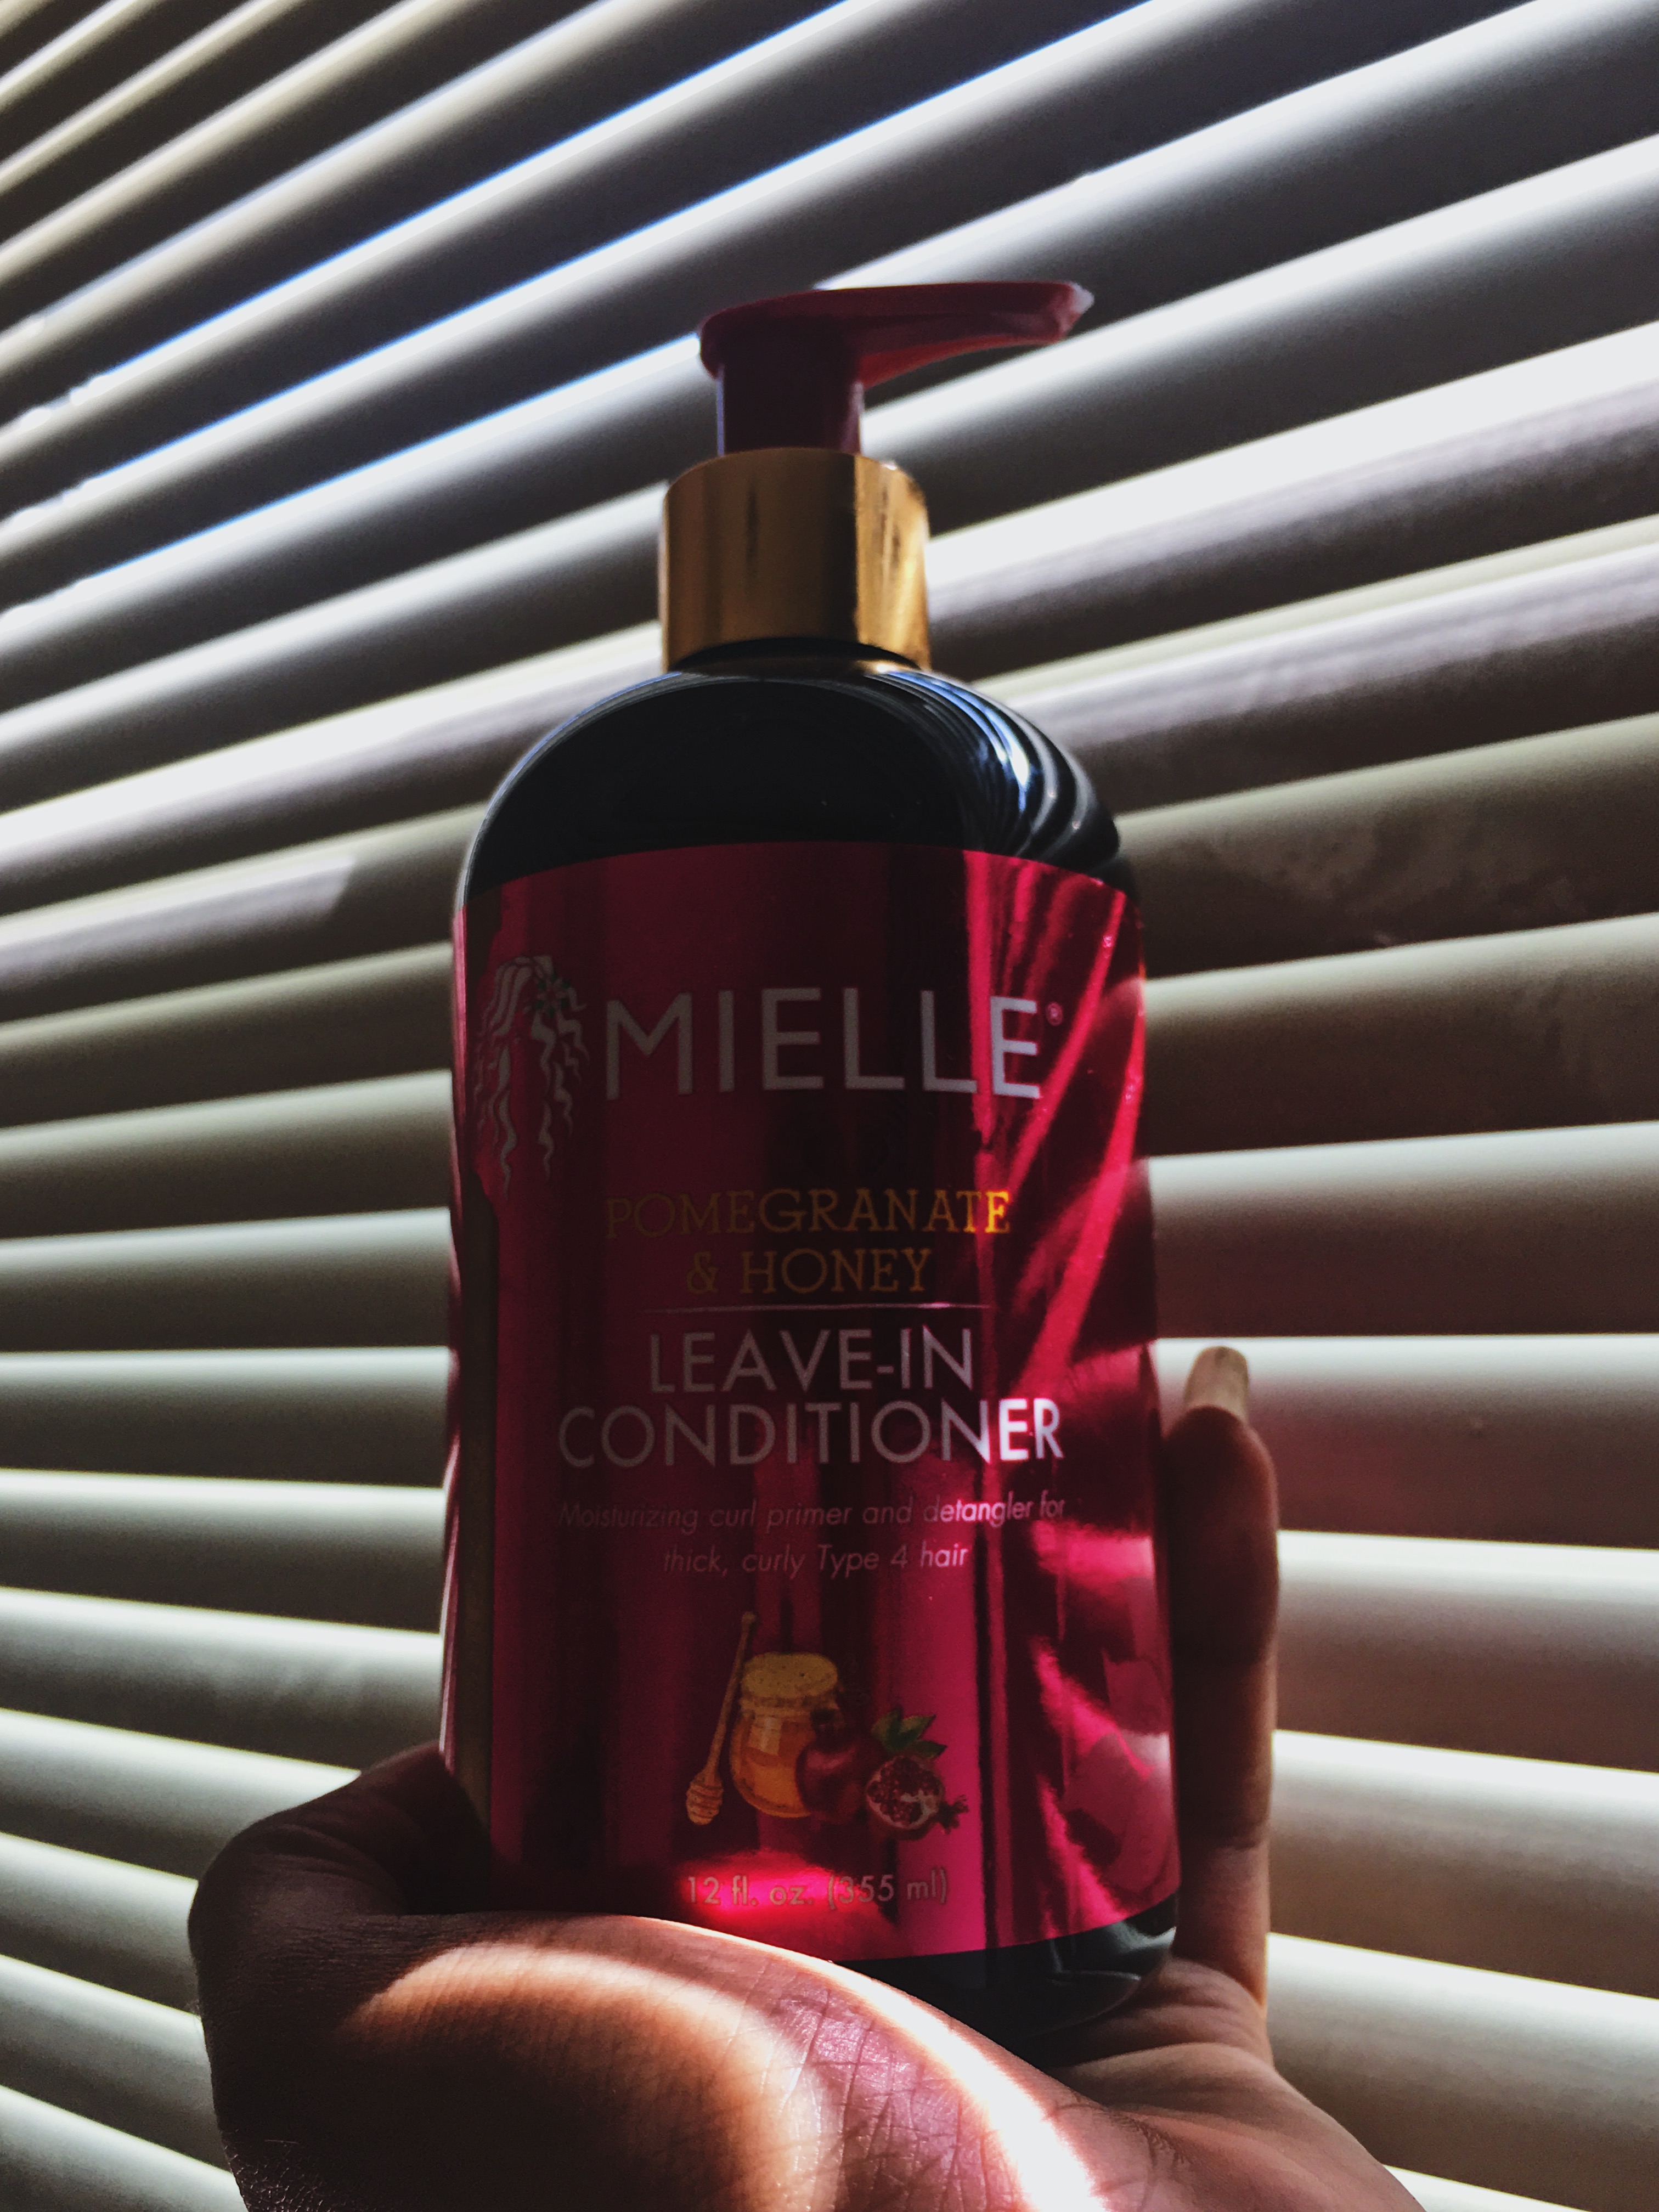 mielle pomegranate and honey leave in conditioner